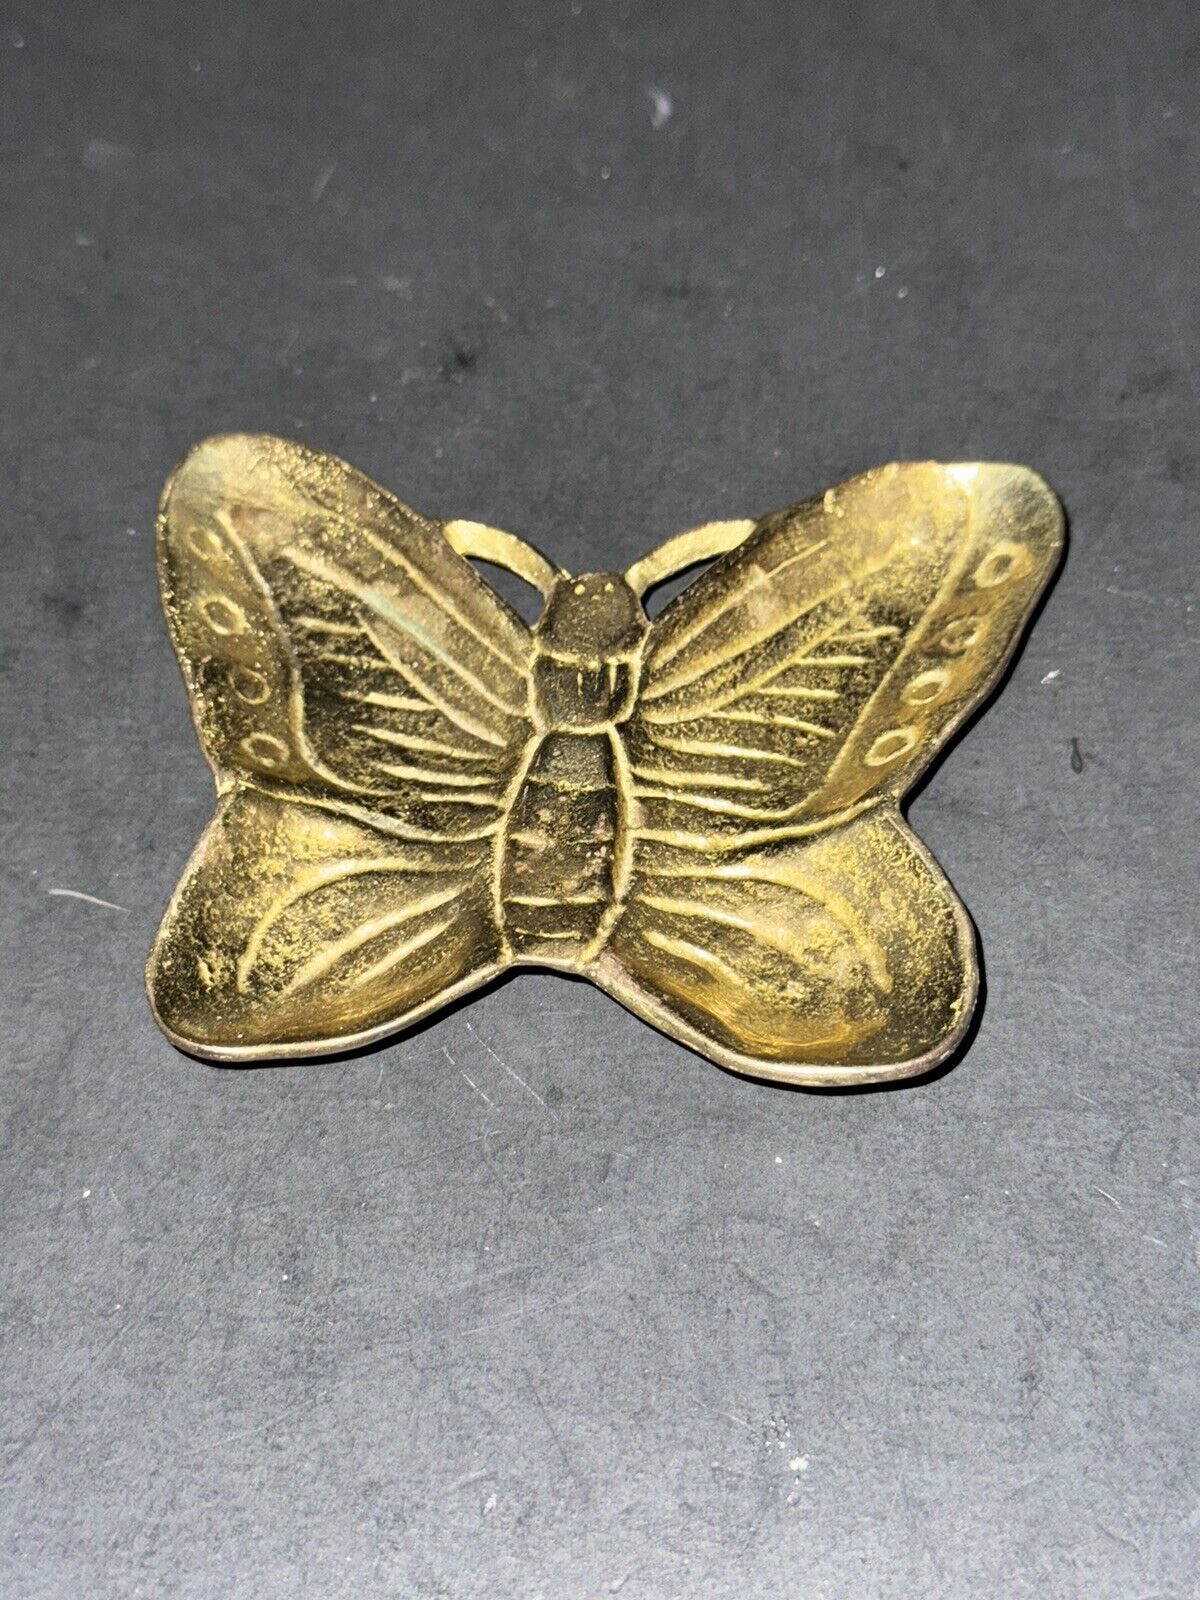 Vintage Brass Butterfly Change Dish Ashtray Trinket Valet Made In Taiwan Heavy